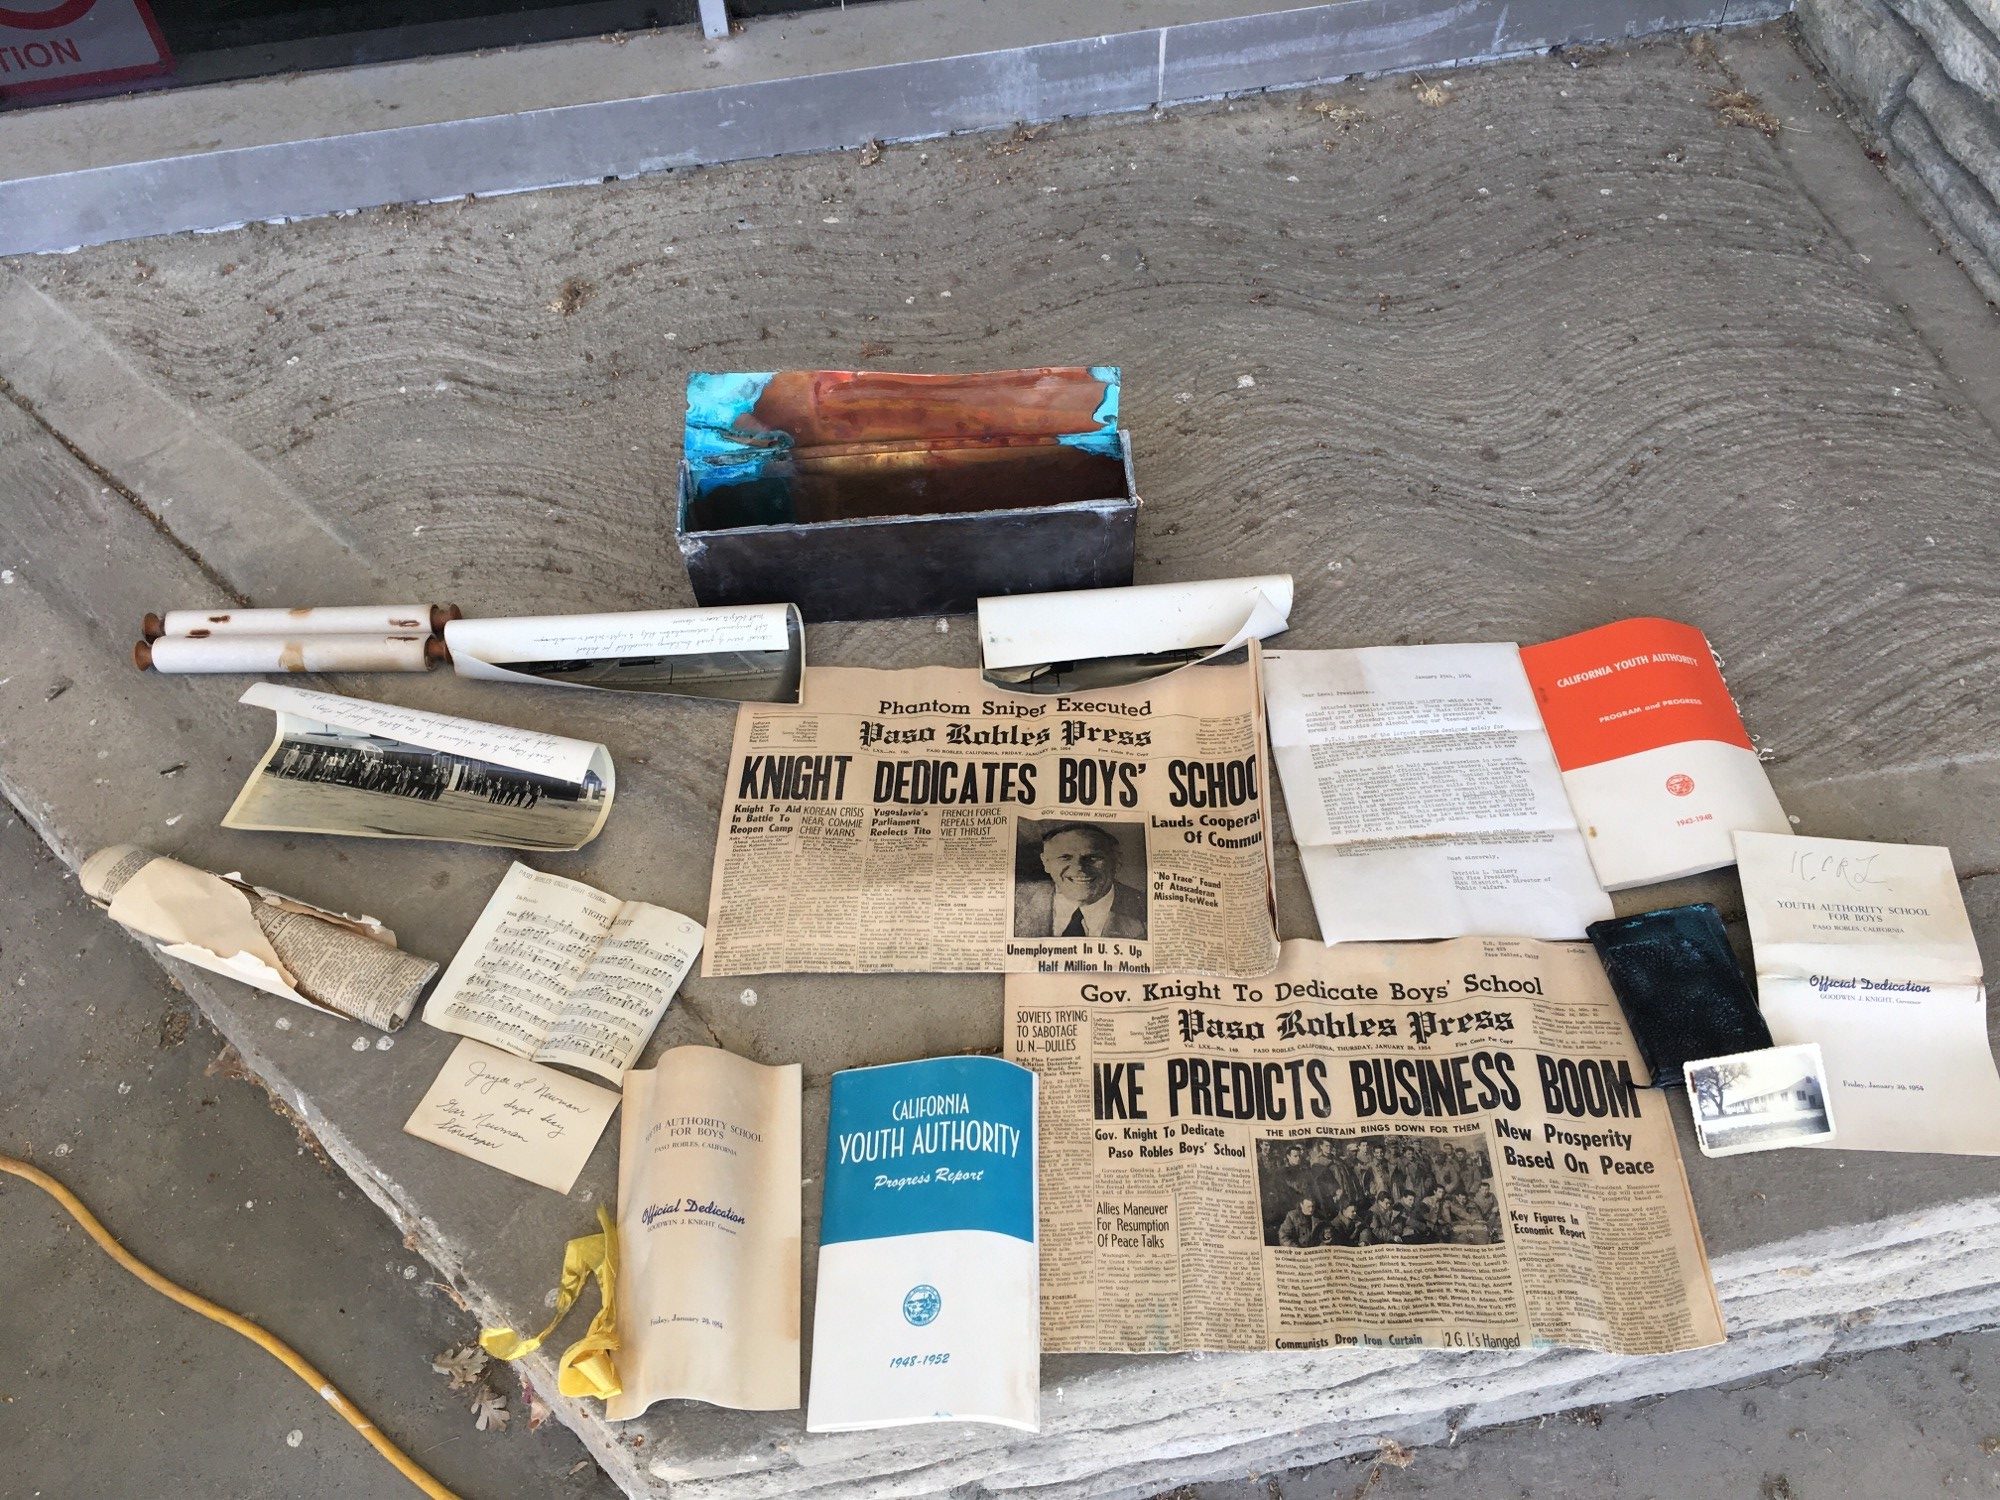 1954 Time Capsule contents